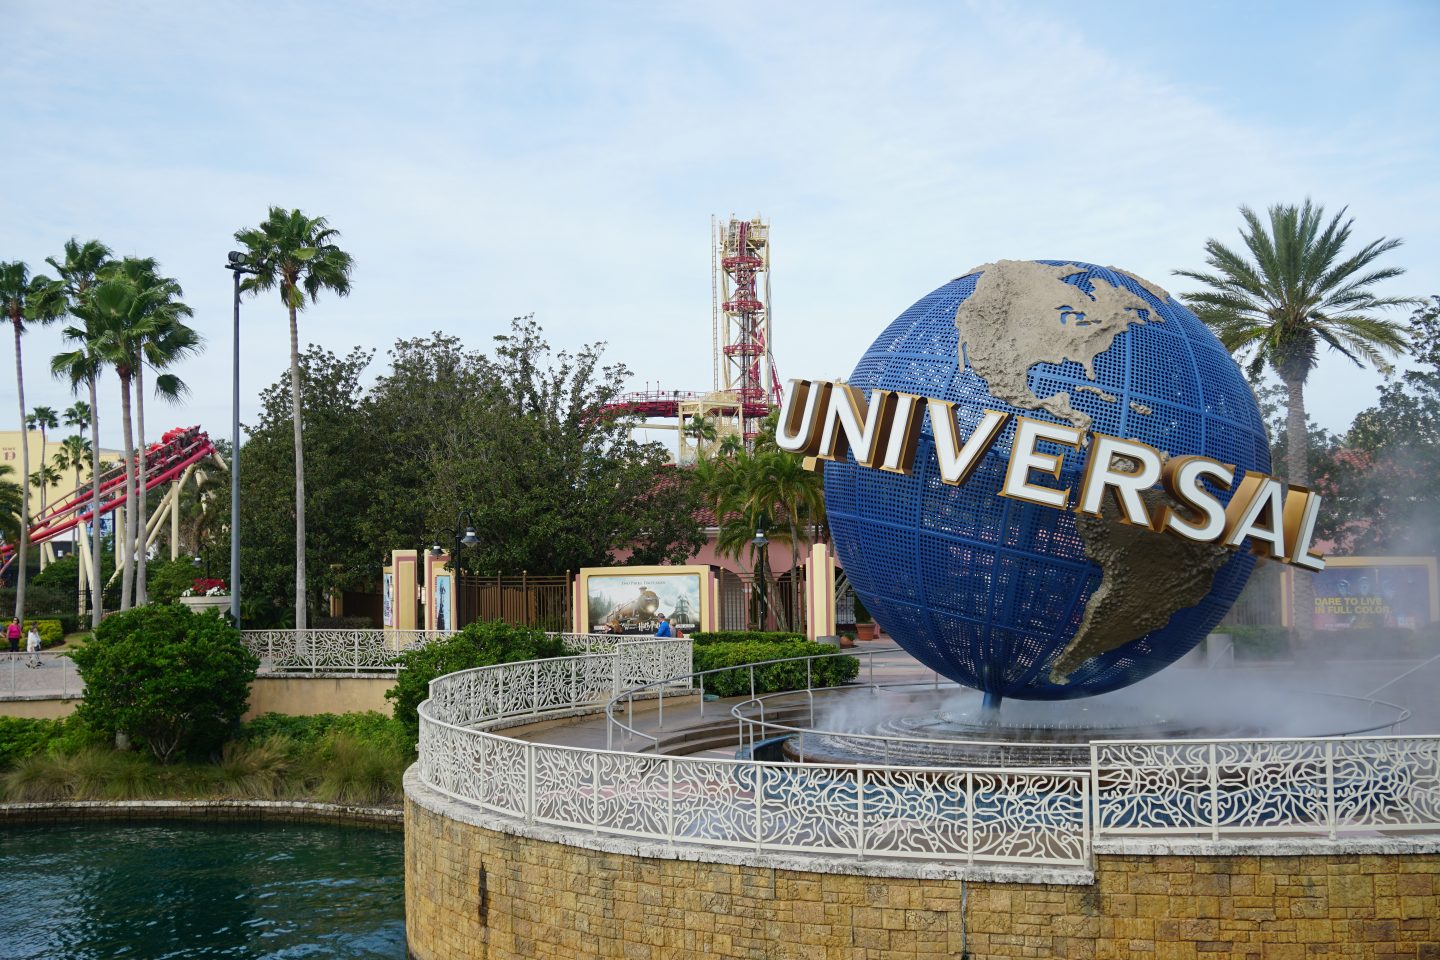 Planning a Trip to Universal Orlando Resort: What to Know Before You Go